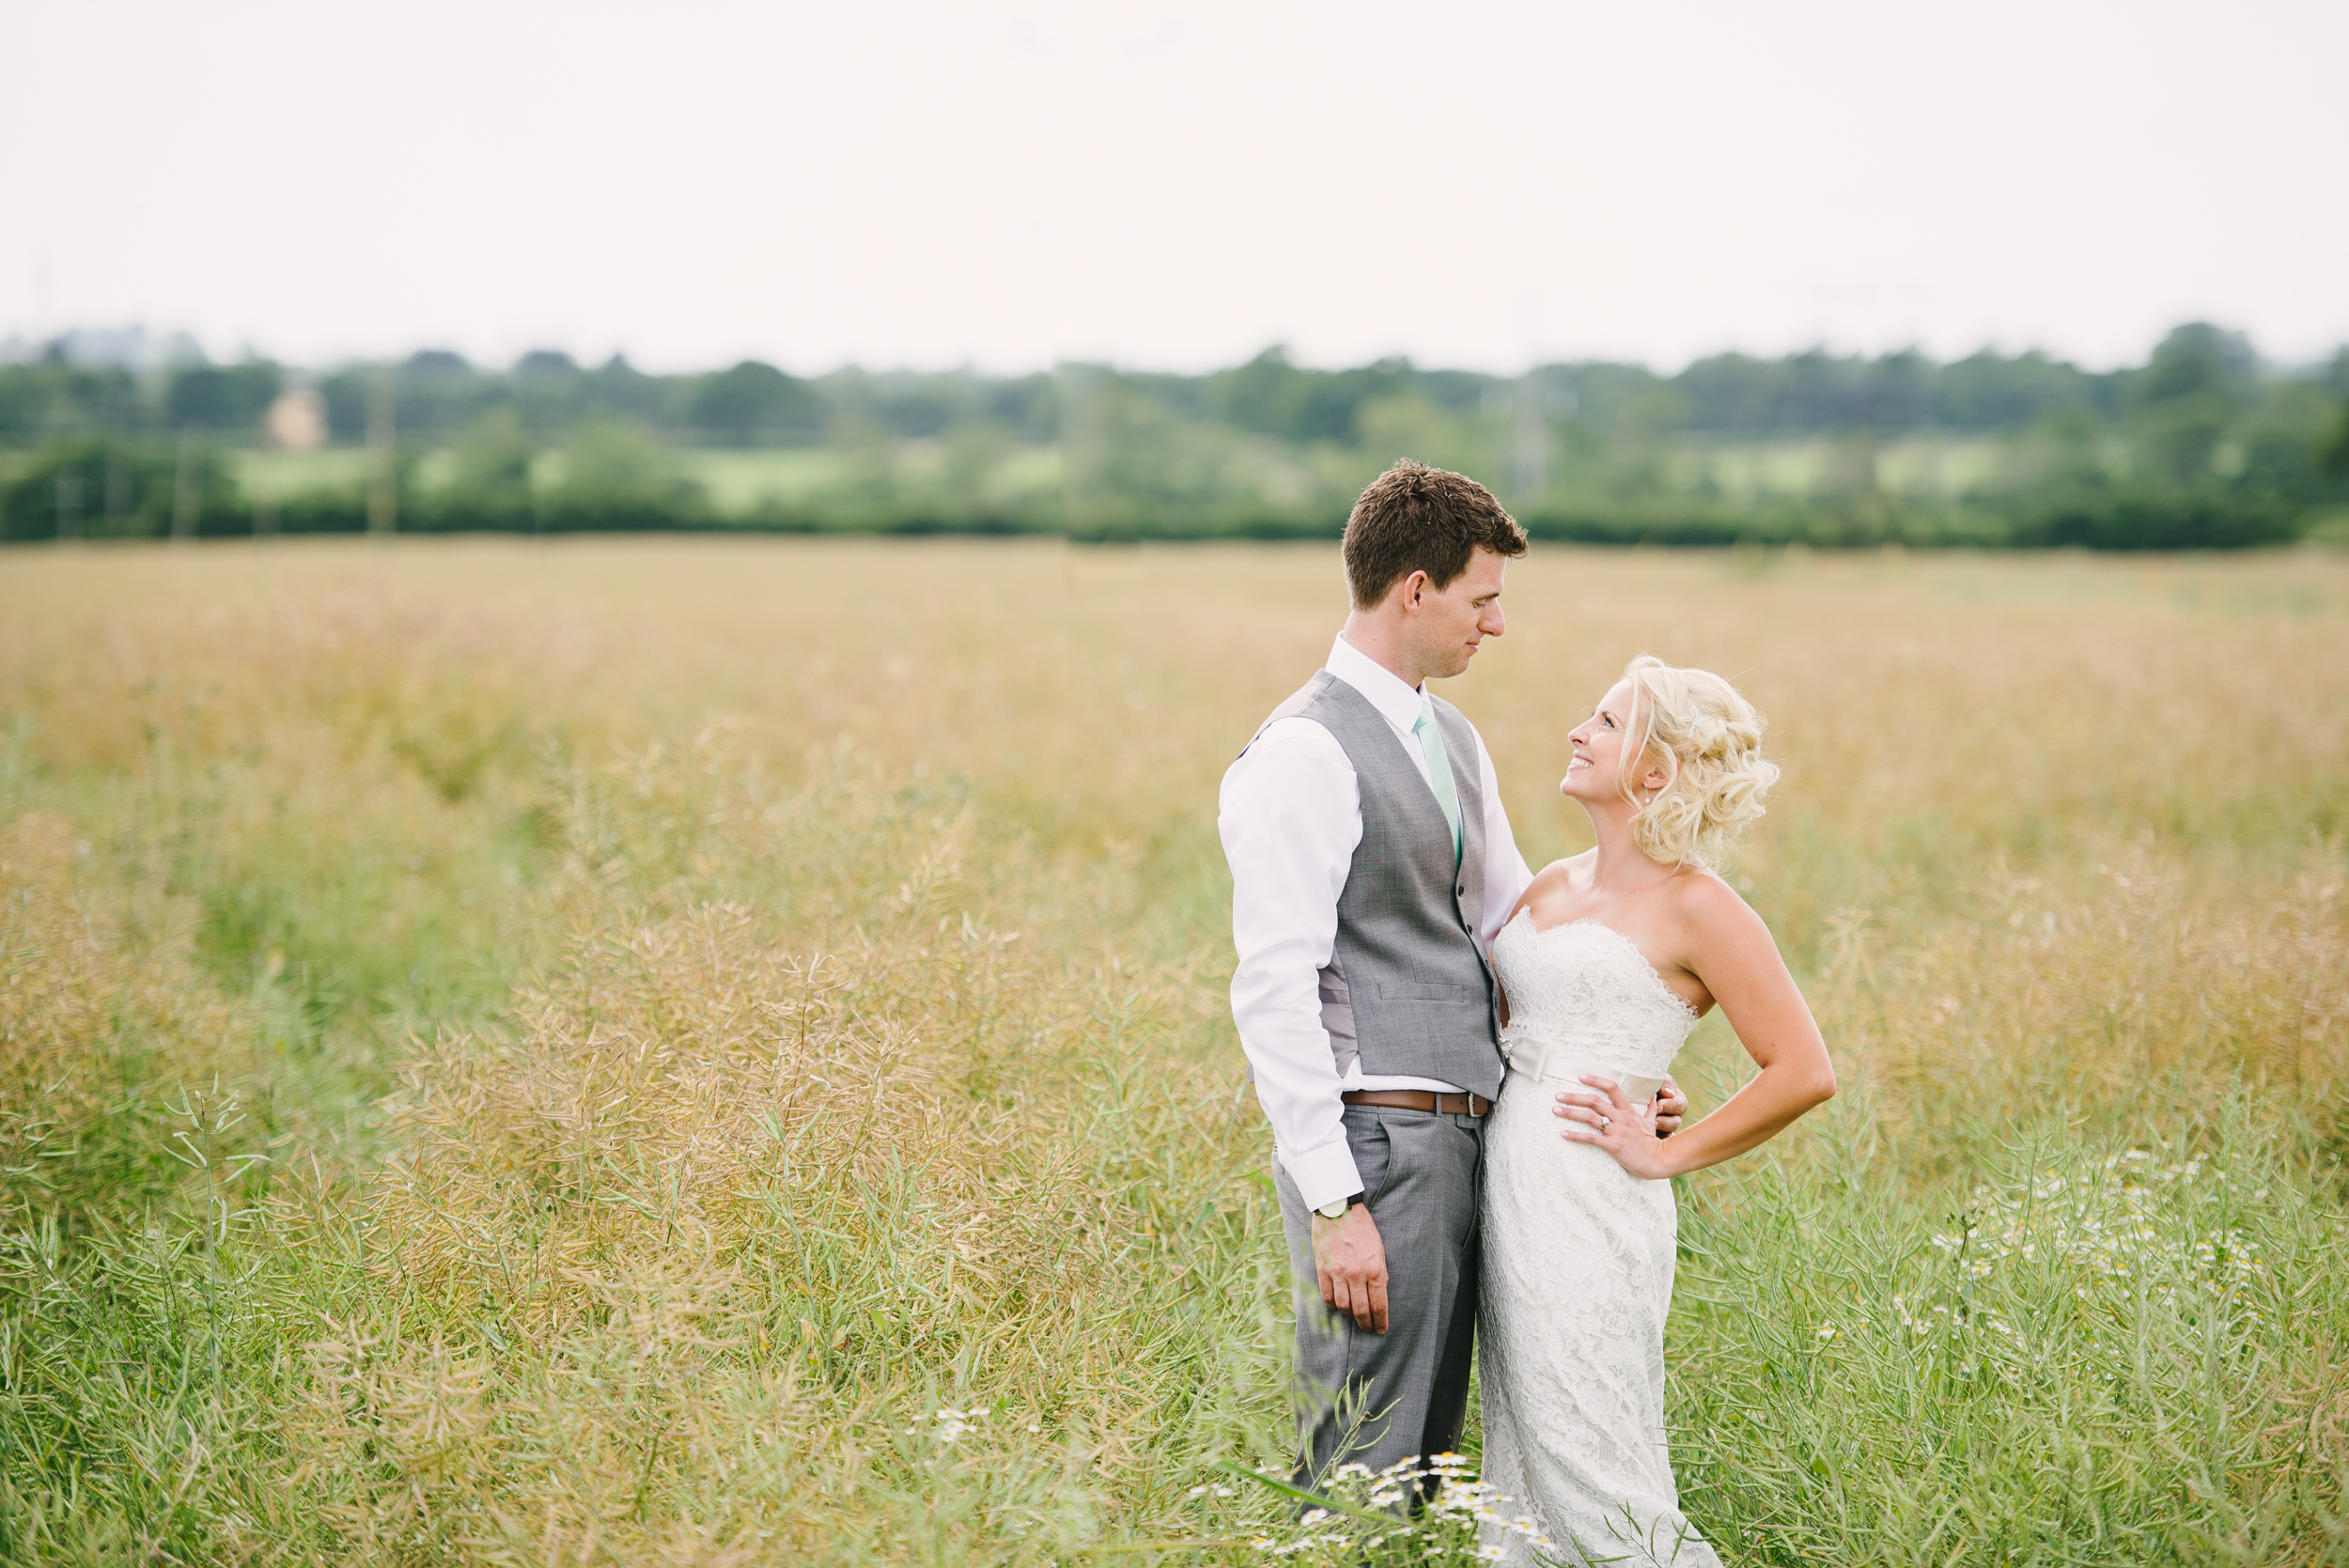 South Wales Wedding photography - Best of 2015